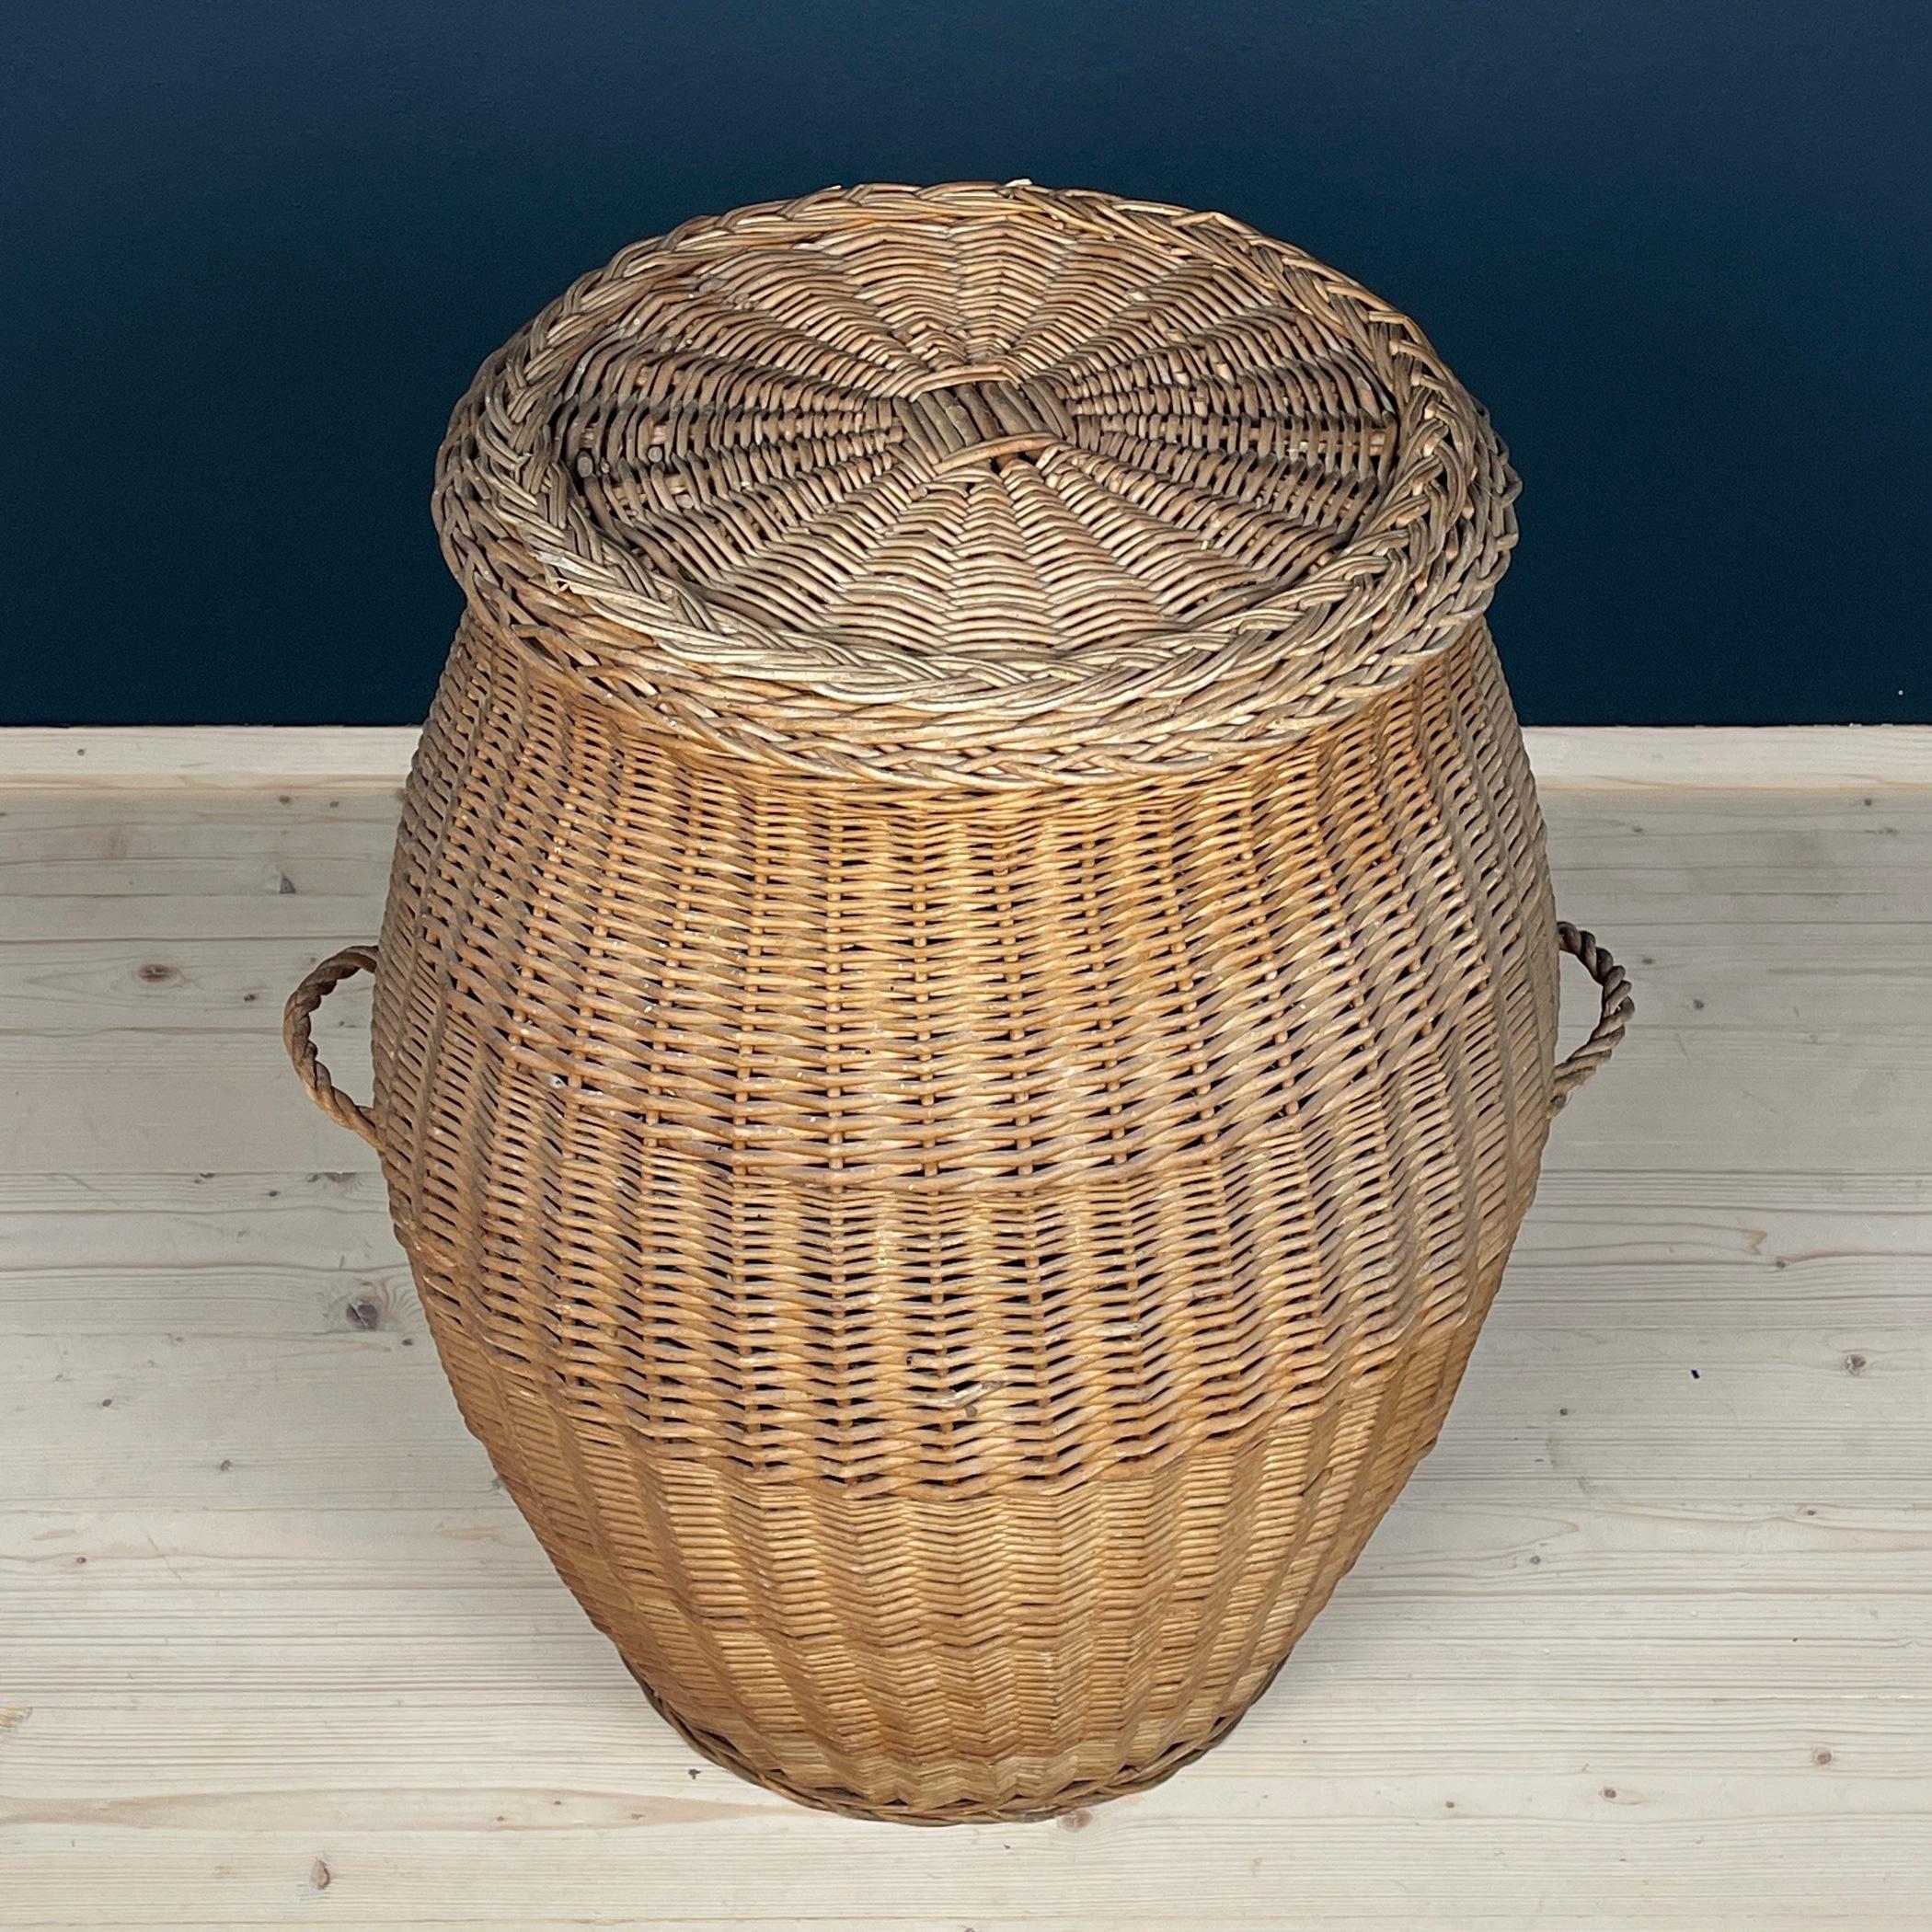 Vintage laundry farm basket wicker made in Yugoslavia in the 1970s.

The basket is in excellent vintage condition, with no damage.

Dimensions:
Width: 51 cm / 20 inches
Height: 65 cm / 25,6 inches

If you have any questions, please contact us. We're